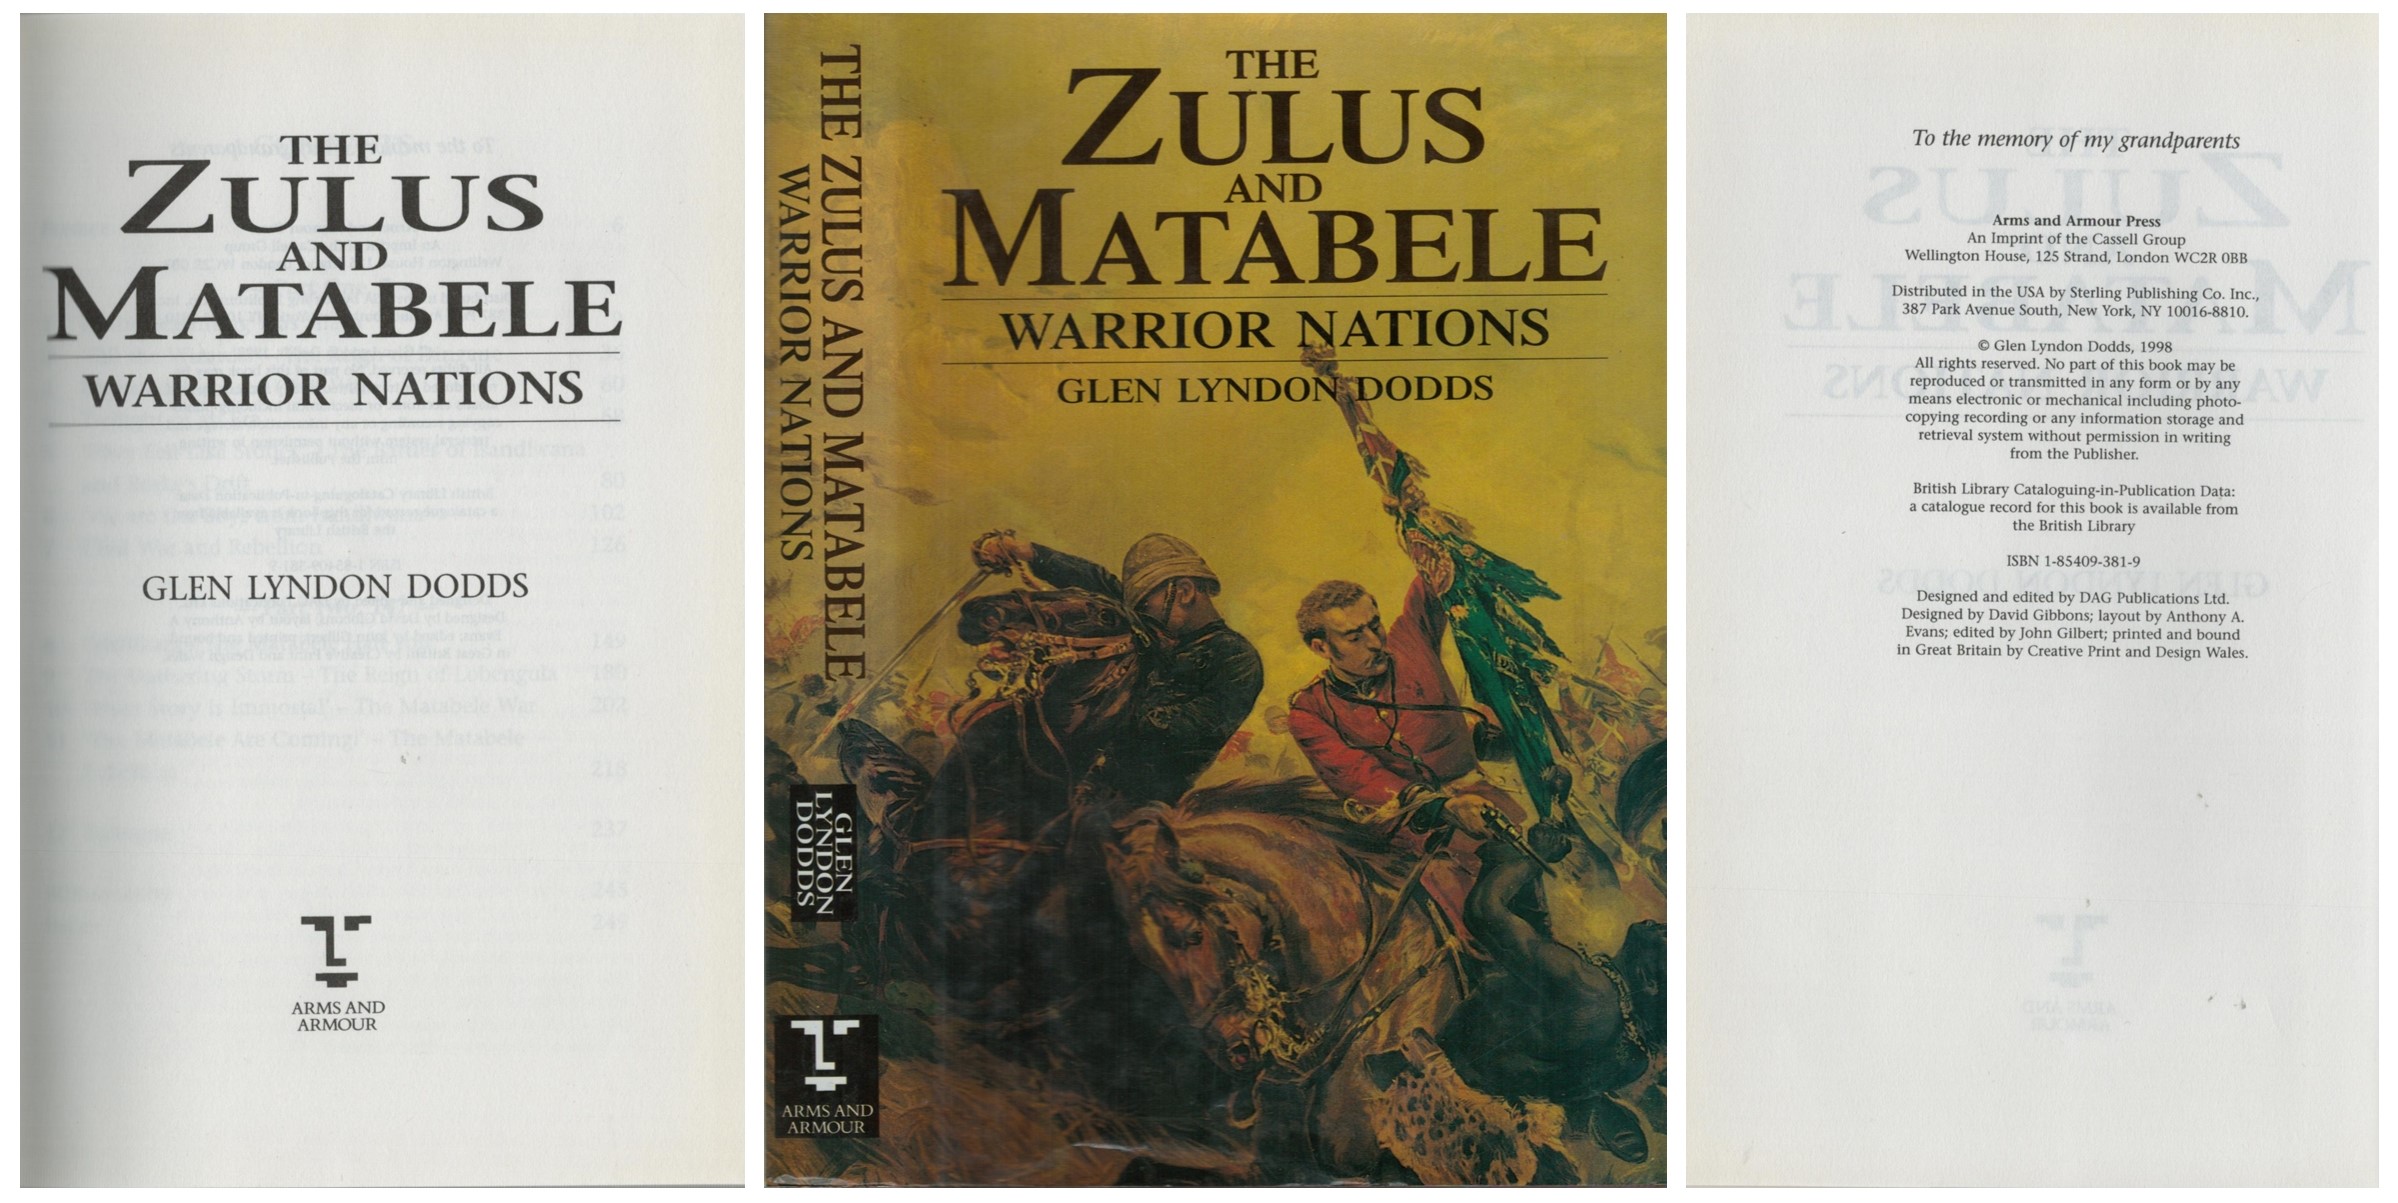 The Zulus And Matabele Warrior Nations Glen Lyndon Dodds unsigned 1998 Hardback book. Arms And